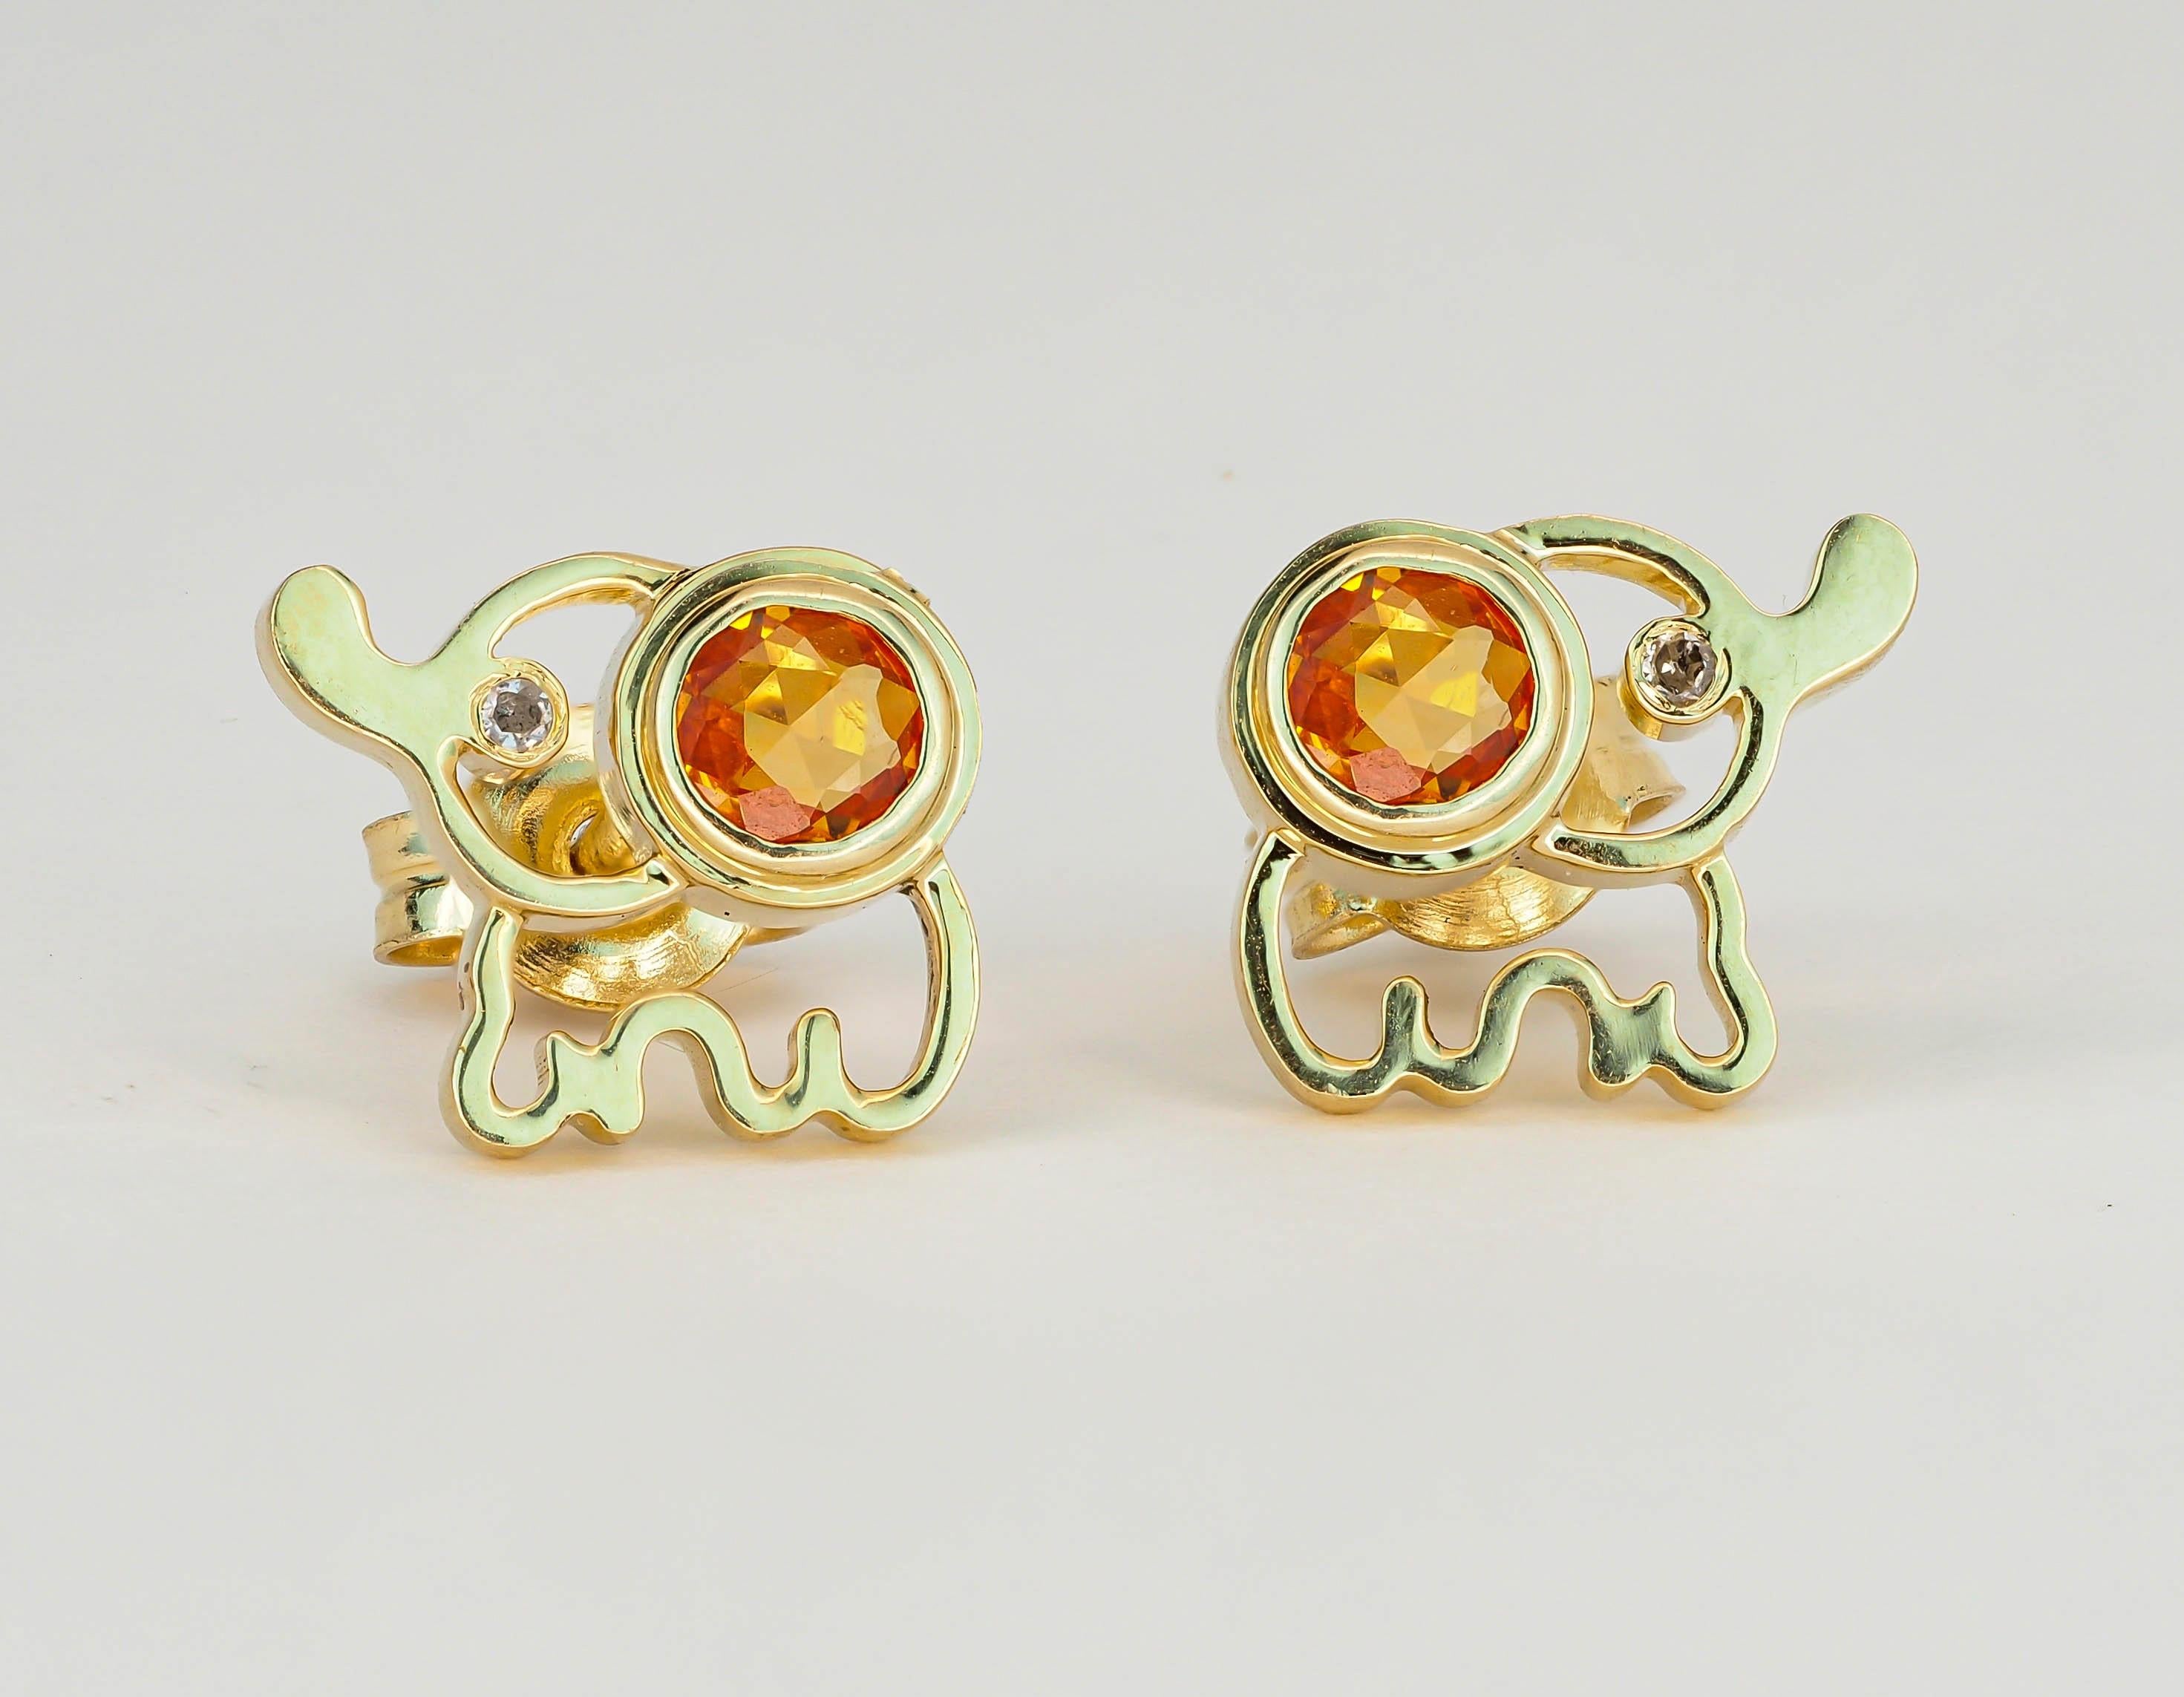 14k Gold Citrine Earrings Studs. 
Elephant earrings studs. Animal earrings. Round citrine studs. Safari gold Jewelry. November birthstone.

Total weight: 2.4 g.
Metal: 14k gold.
Size 7x8 mm.

Central stones: natural citrines - 2 pieces
Cut: